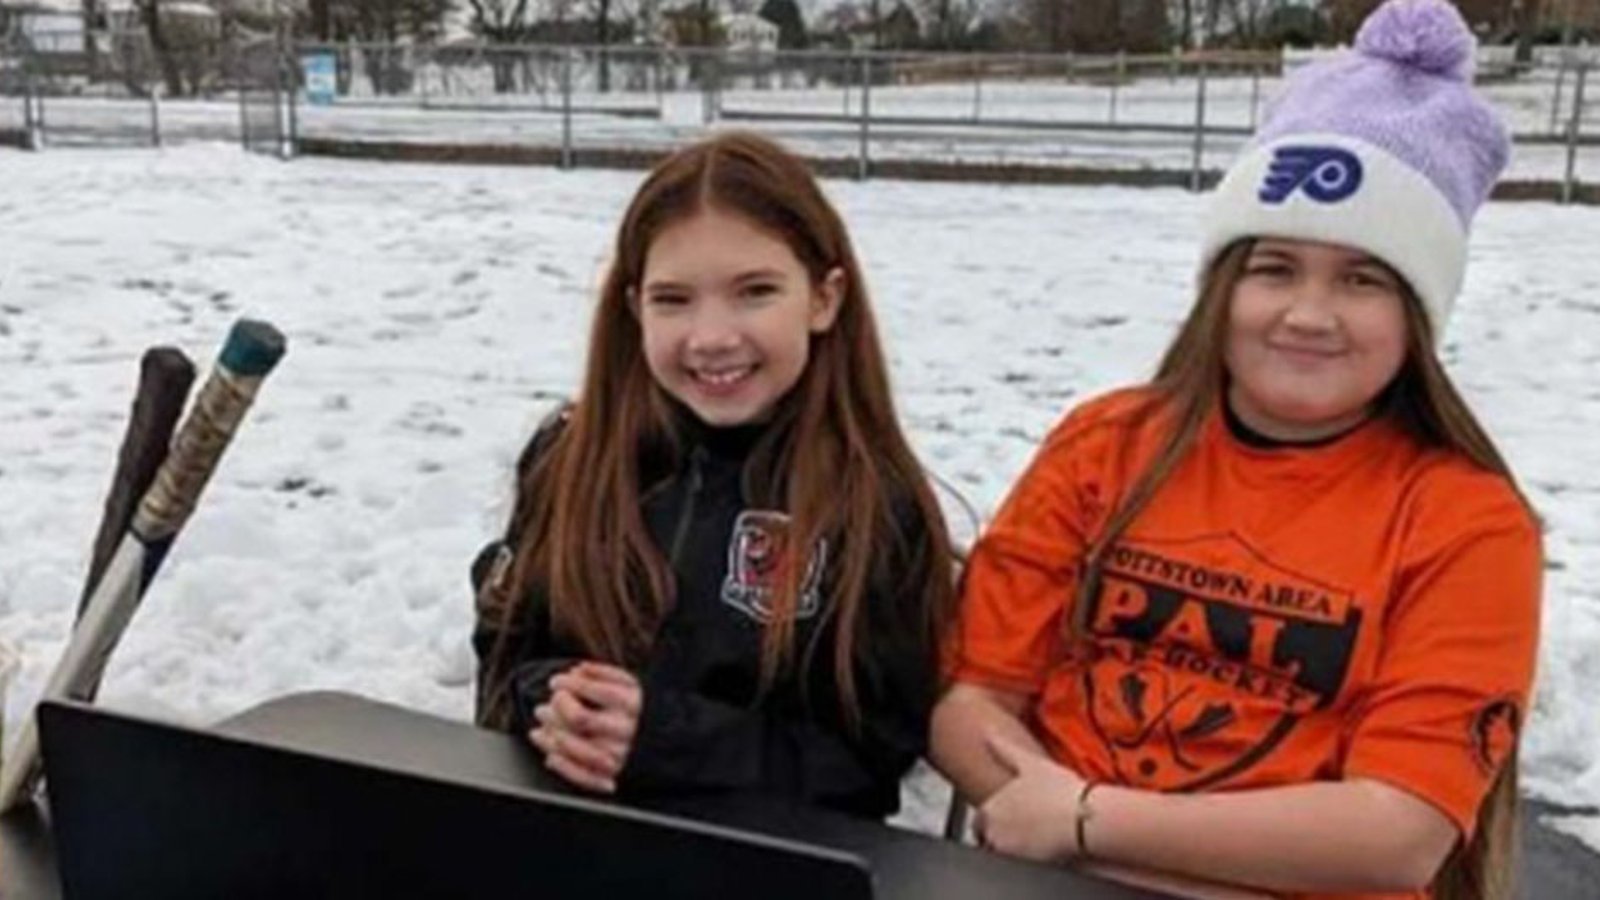 Two 11 year old girls rescue hockey rink from being converted into pickleball courts